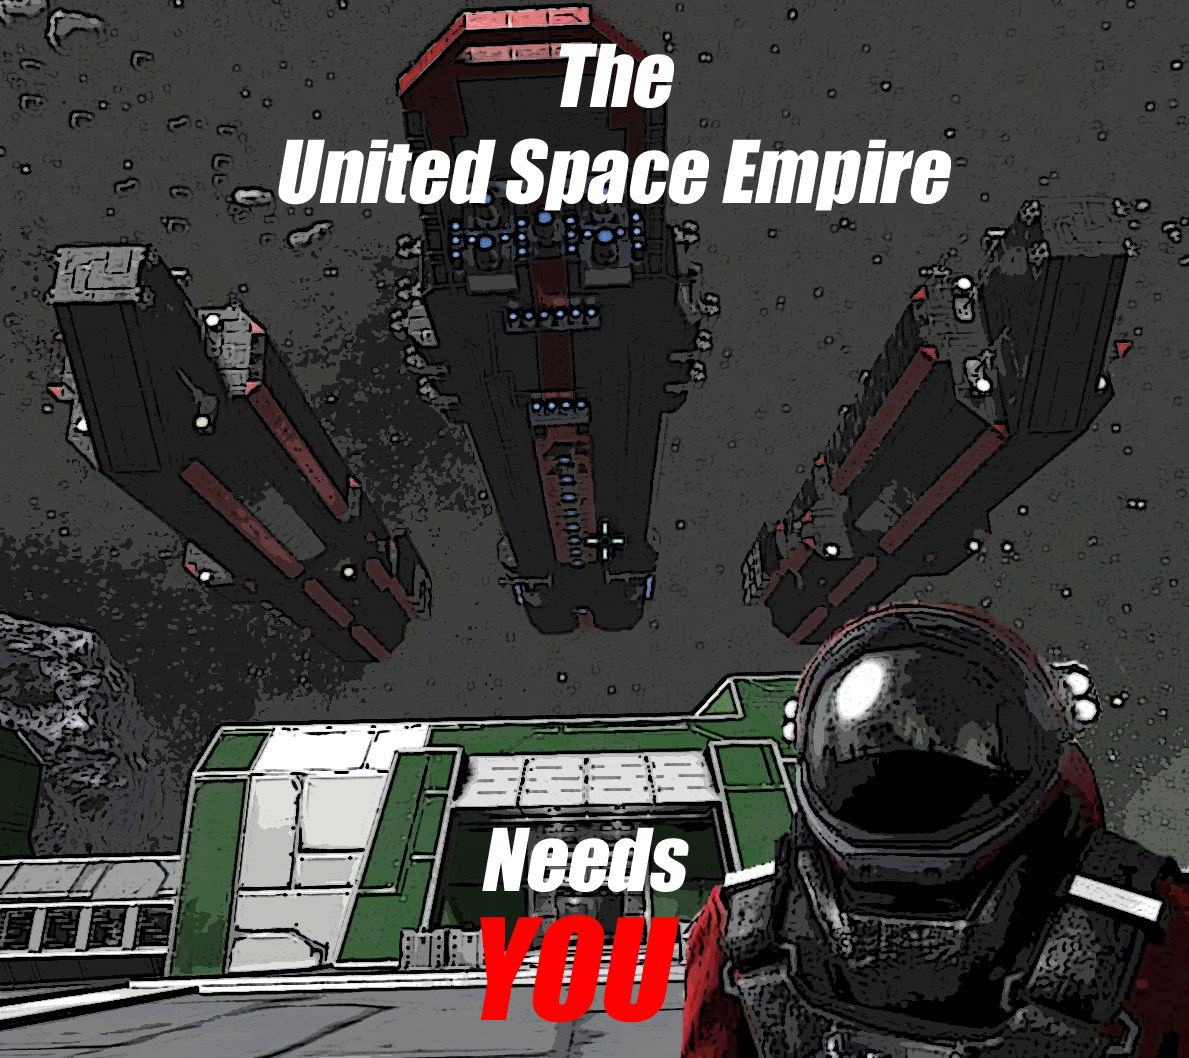 Join the Empire! Our ships are (not) giant triangles!